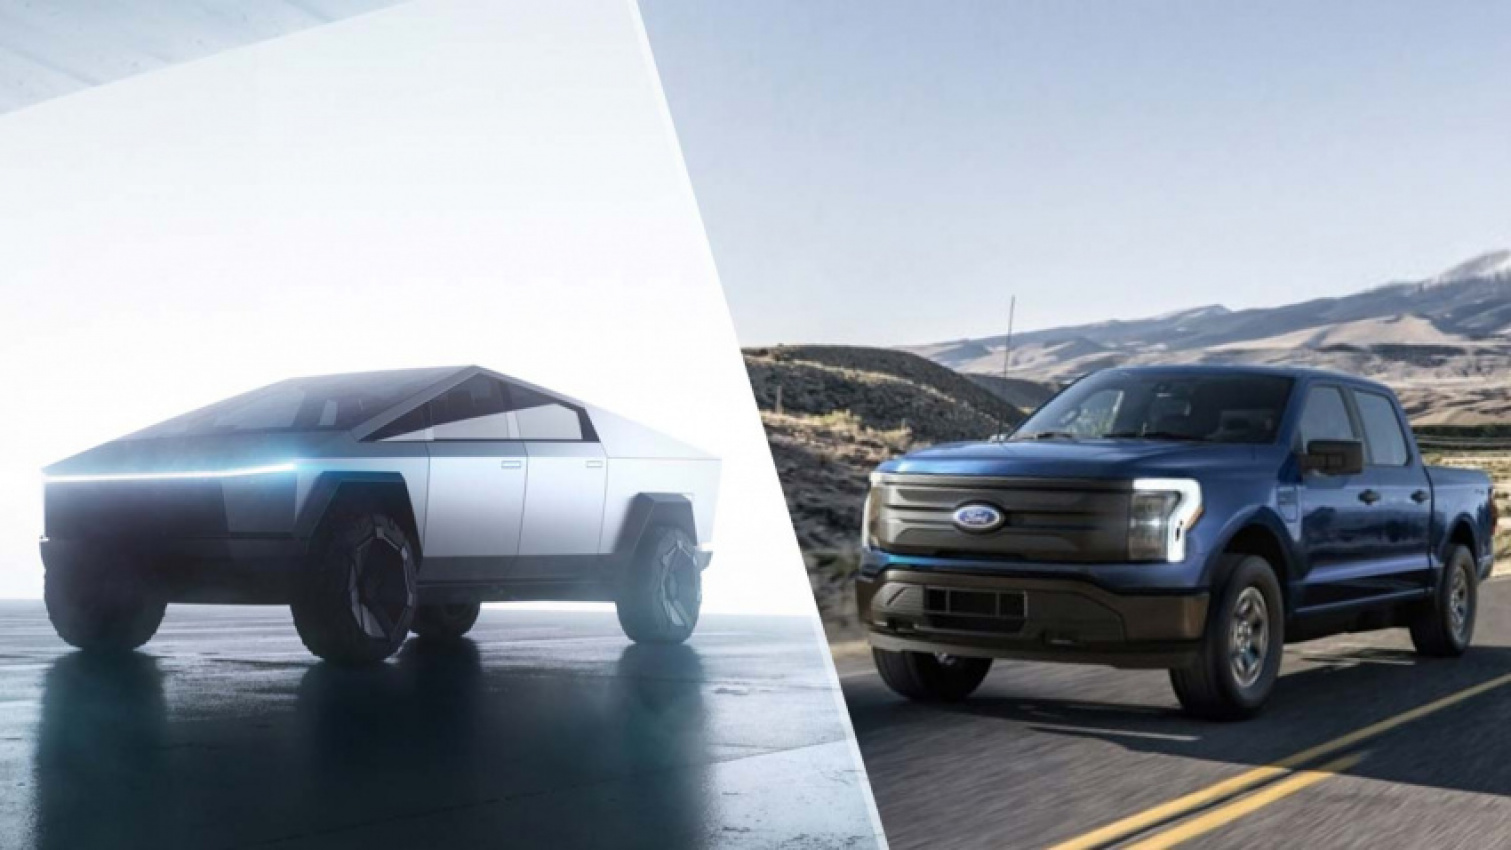 ford, news, tesla, car tech, cars, cybertruck, ford f-150, tesla cybertruck vs. ford f-150 lightning: which electric truck will win?